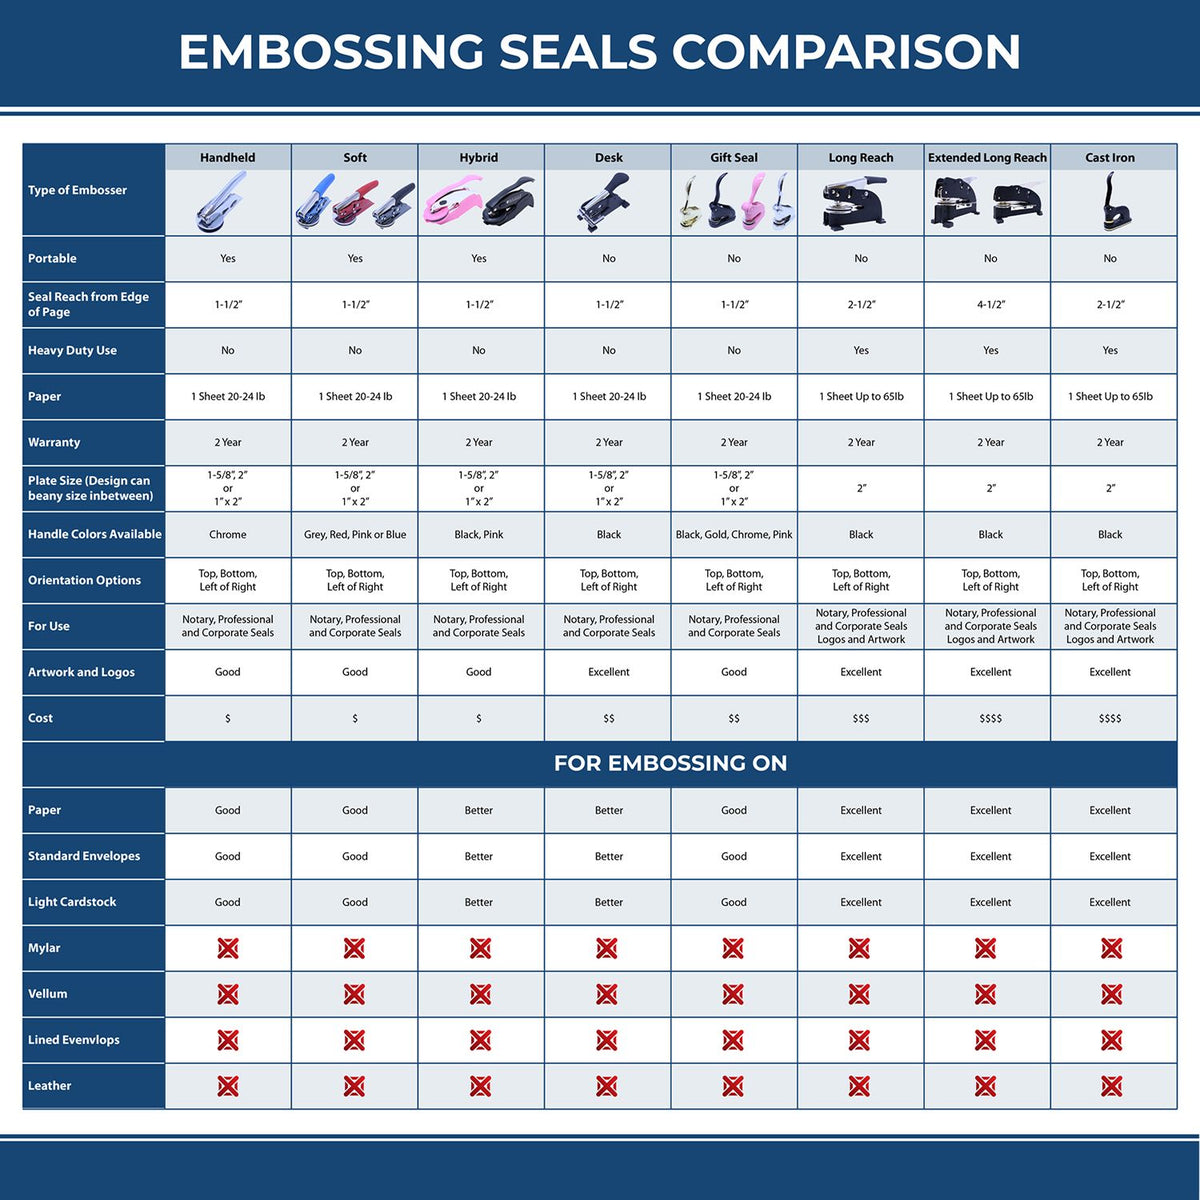 A comparison chart for the different types of mount models available for the State of New Hampshire Long Reach Architectural Embossing Seal.